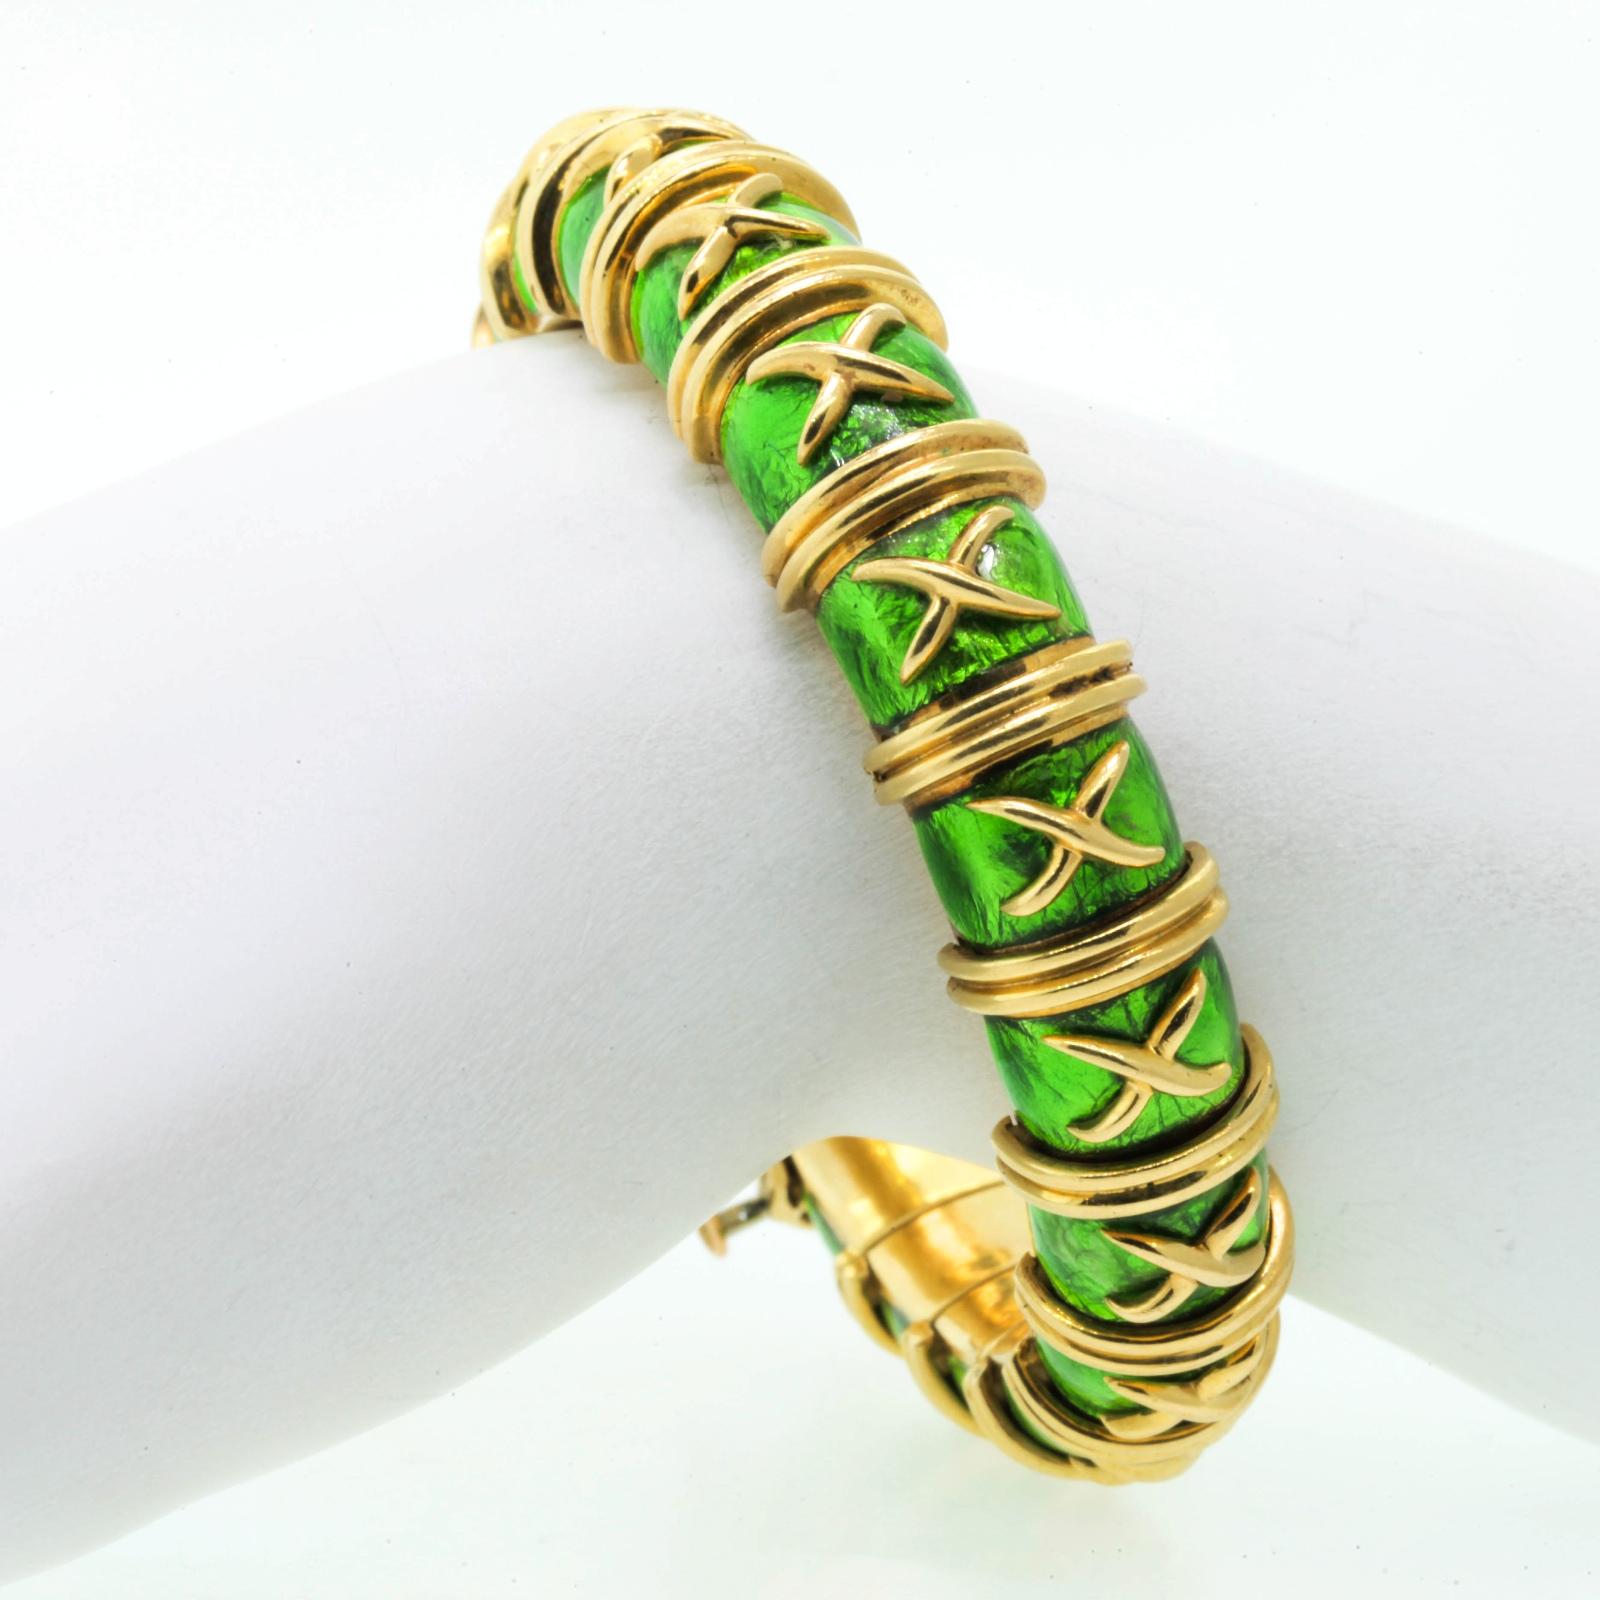 Always iconic Tiffany & Co. Schlumberger Croissillon 18KT yellow gold bracelet of Paillone peridot green enamel.  The bracelet measures 6 3/8 inches in diameter - to fit a 6.5 medium wrist.  Made in France with French hallmarks.  For the connoisseur